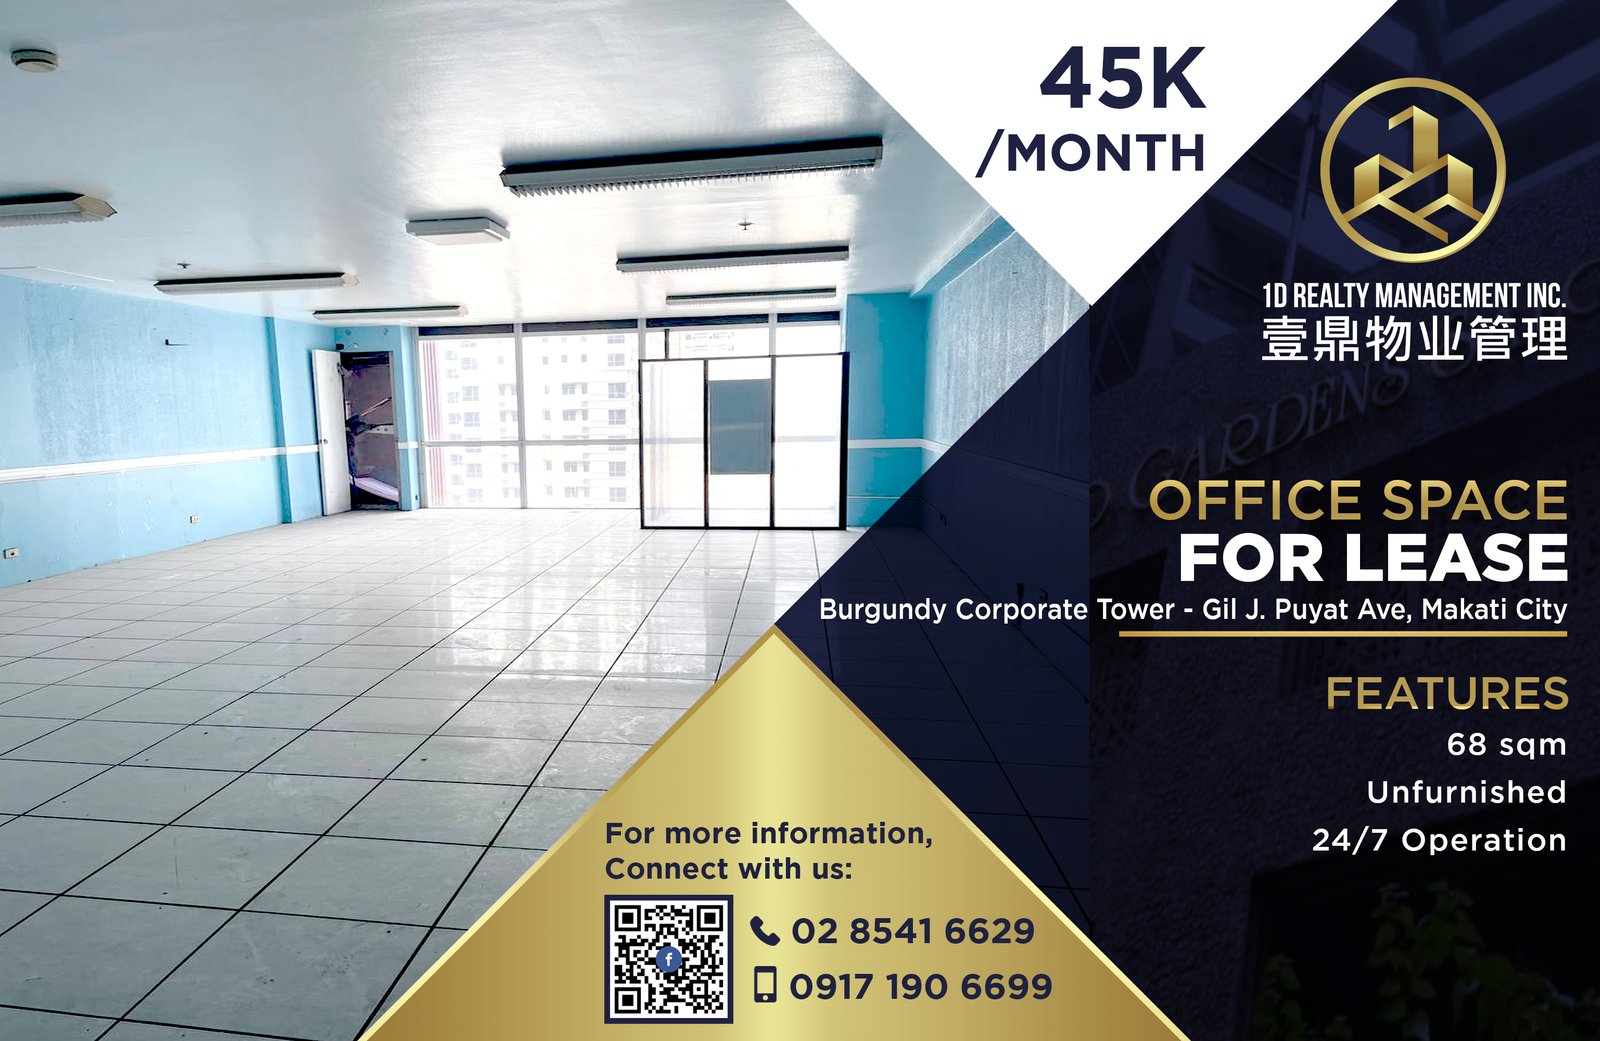 Burgundy Corporate Tower - 252 Sen. Gil J. Puyat Ave, Makati City - OFFICE SPACE FOR LEASE